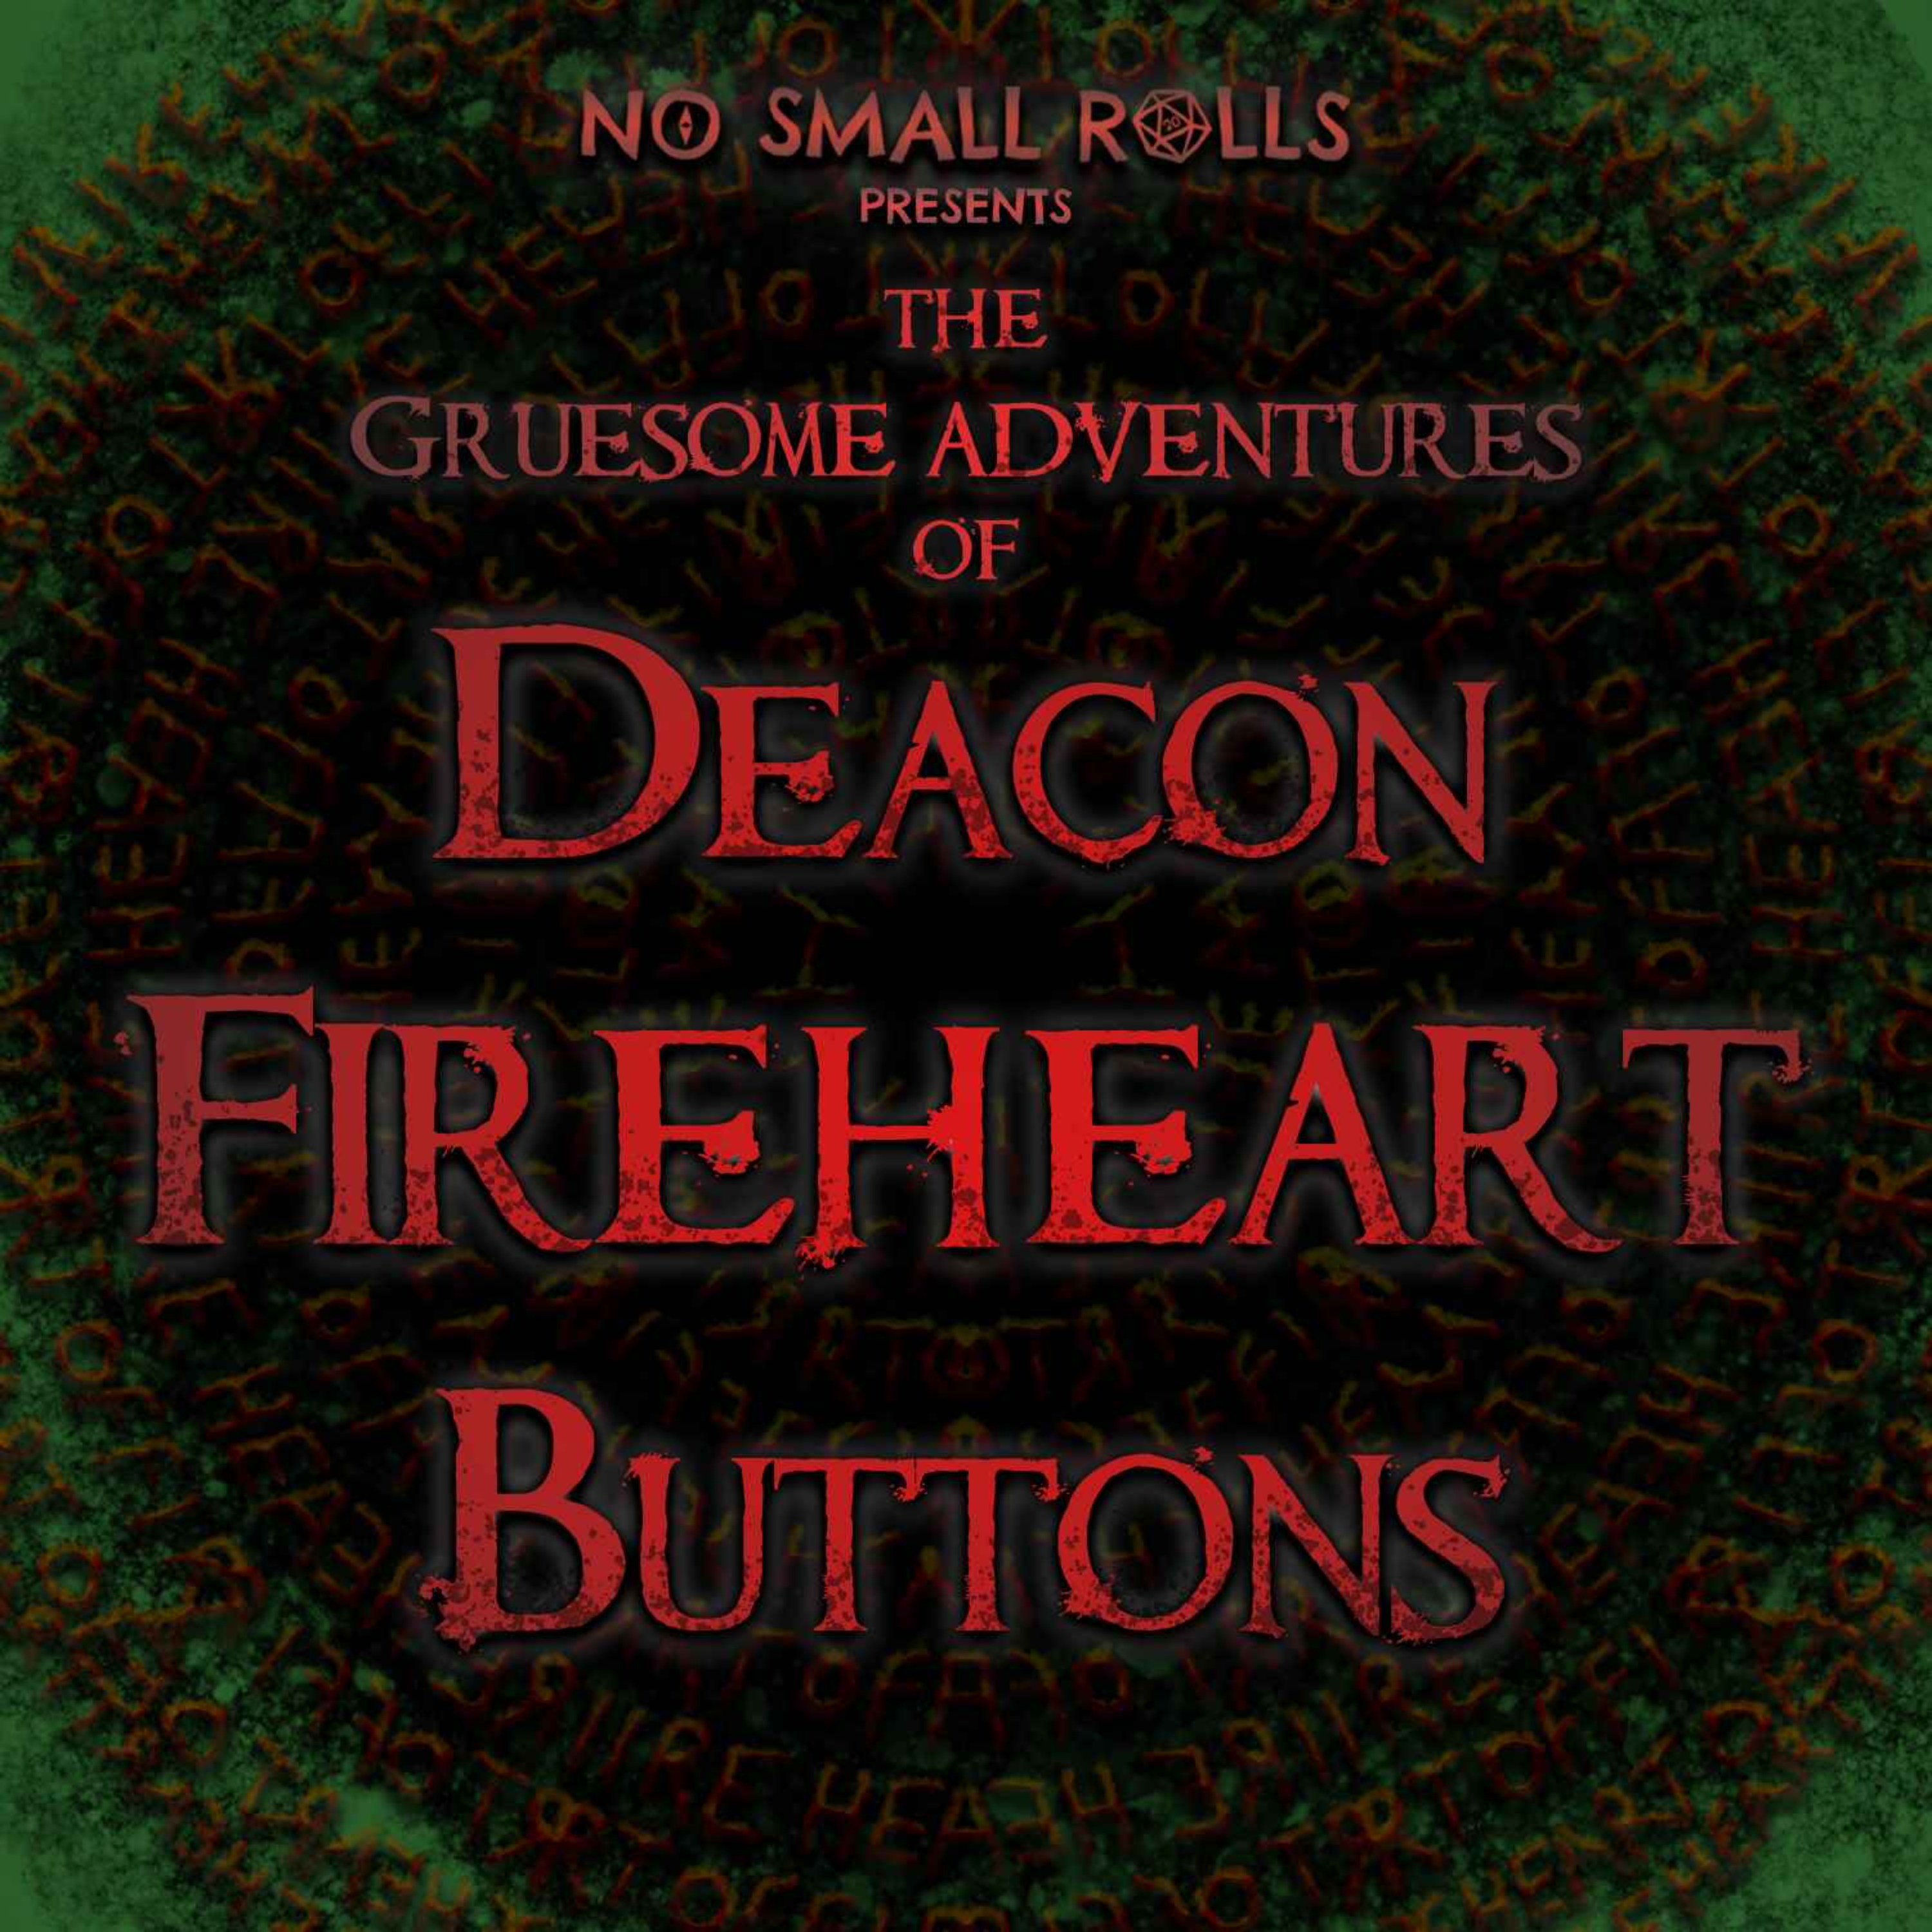 cover art for The Gruesome Adventures of Deacon Fireheart Buttons - Episode 1